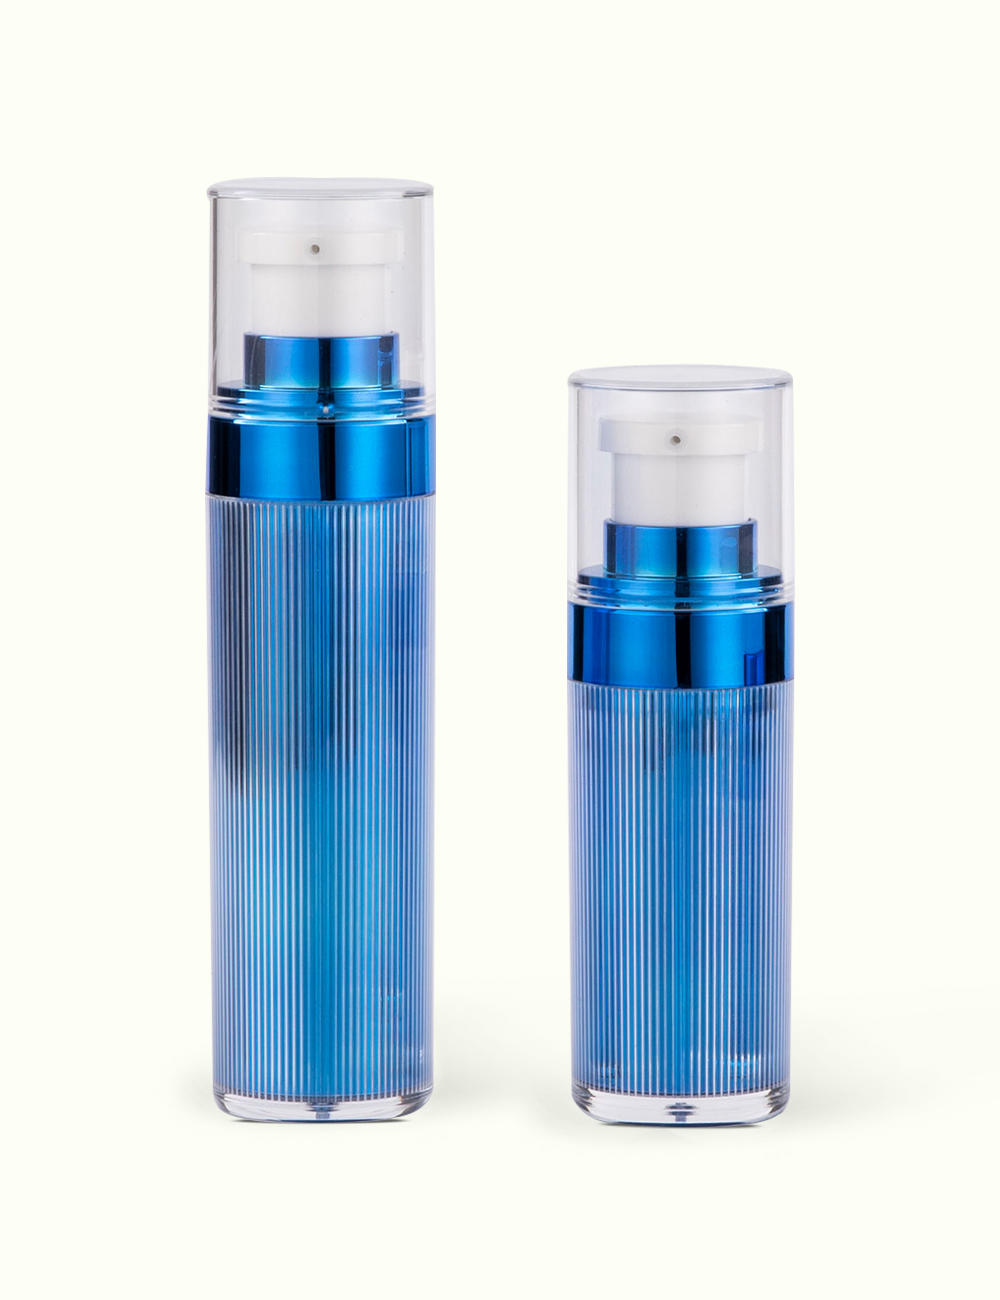 What are the benefits of using an airless lotion bottle compared to traditional pump bottles?